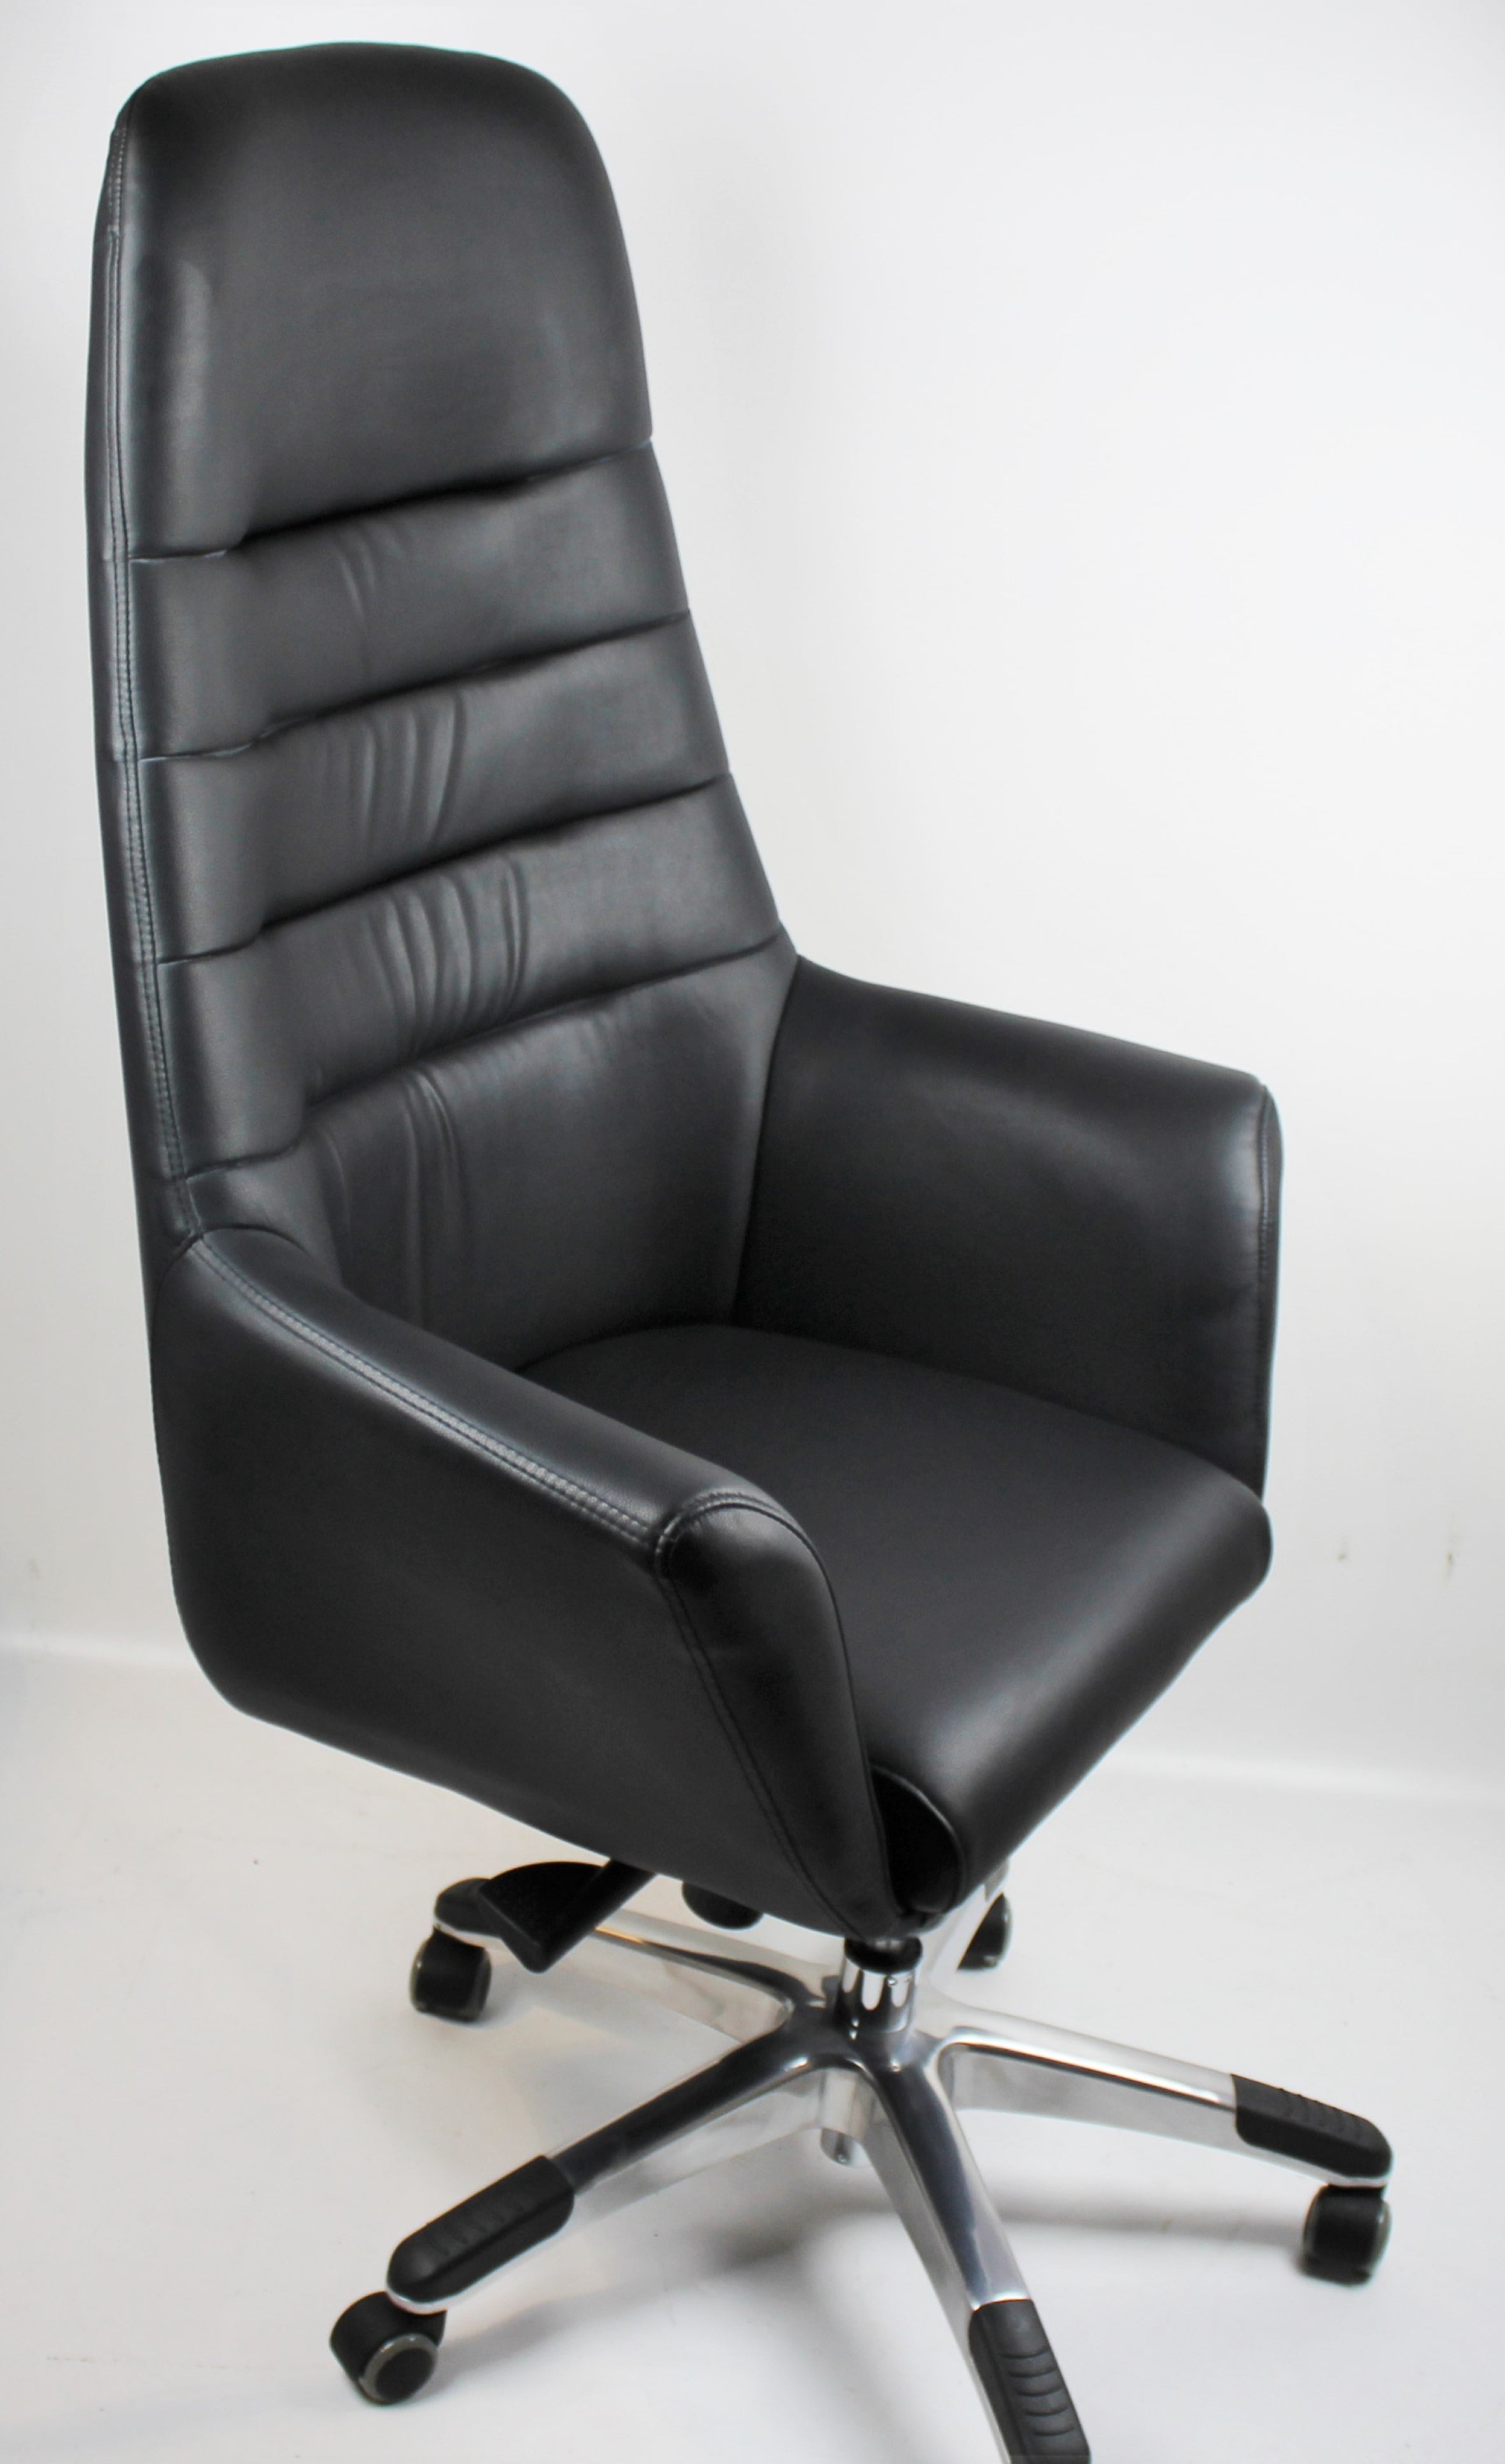 Office Chair In Black With Swivel GRA-CHA-506A-BLK Near Me